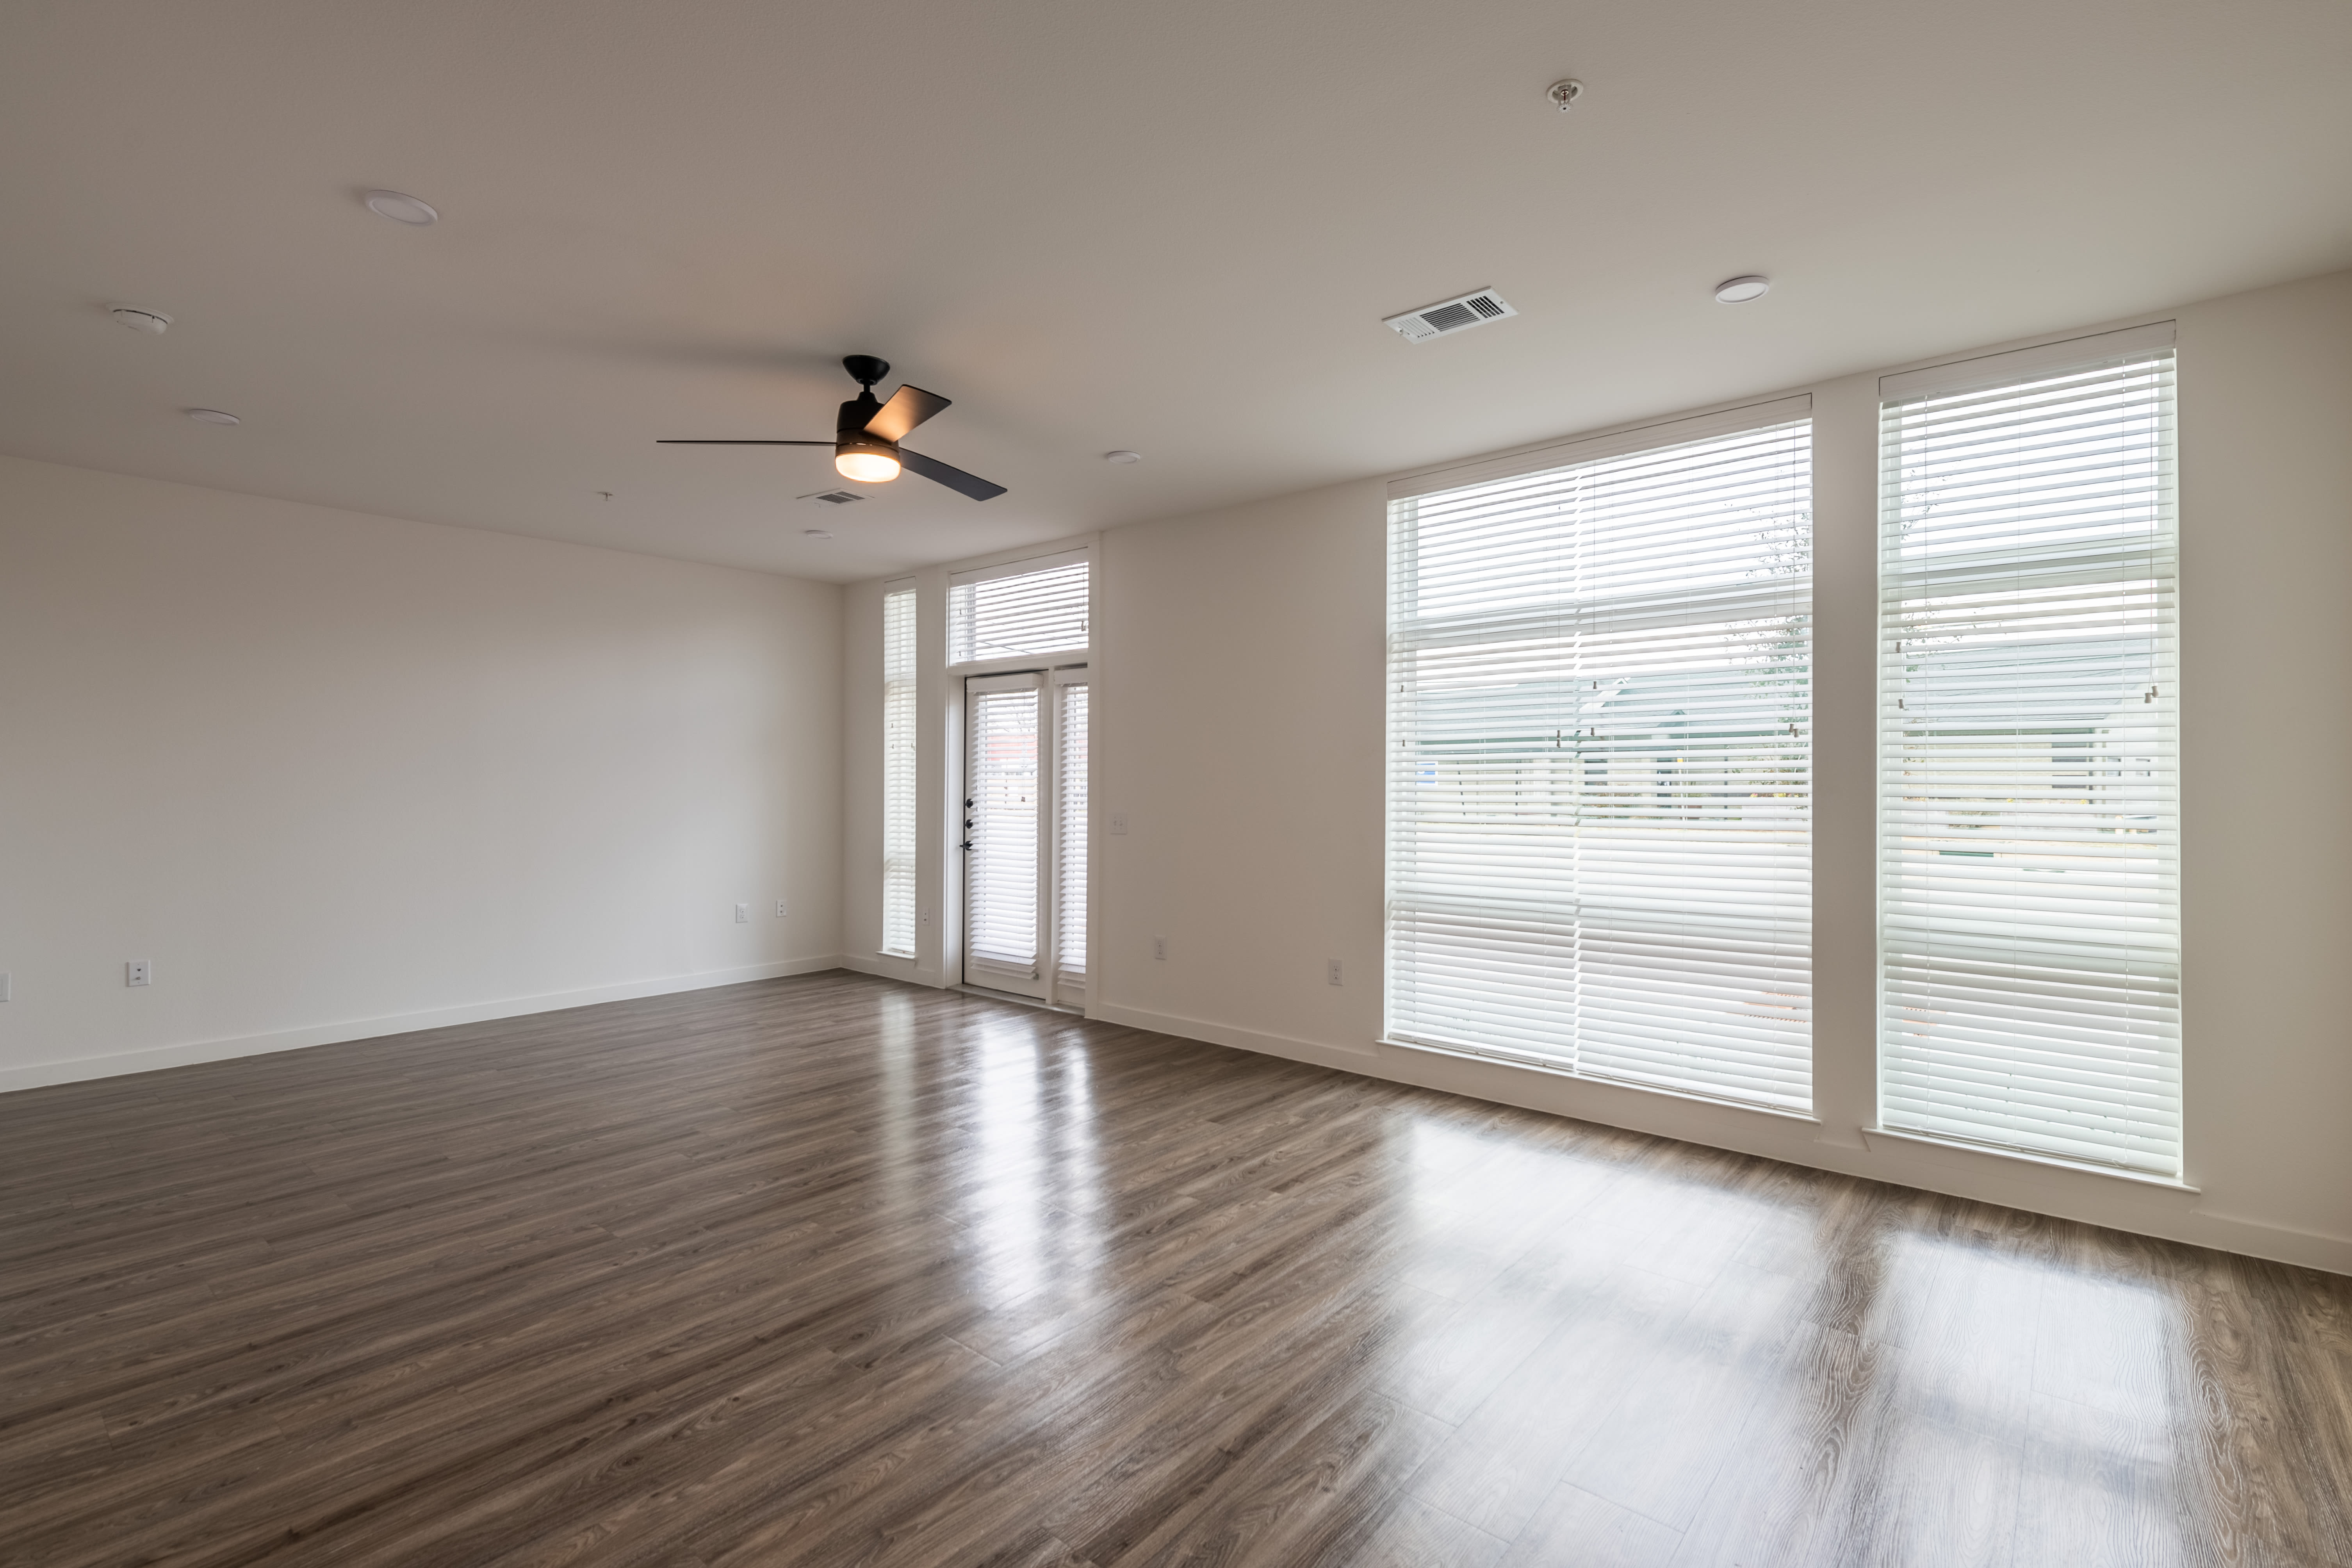 Large window wood floor room with a view at The Langford in Dallas,TX}}